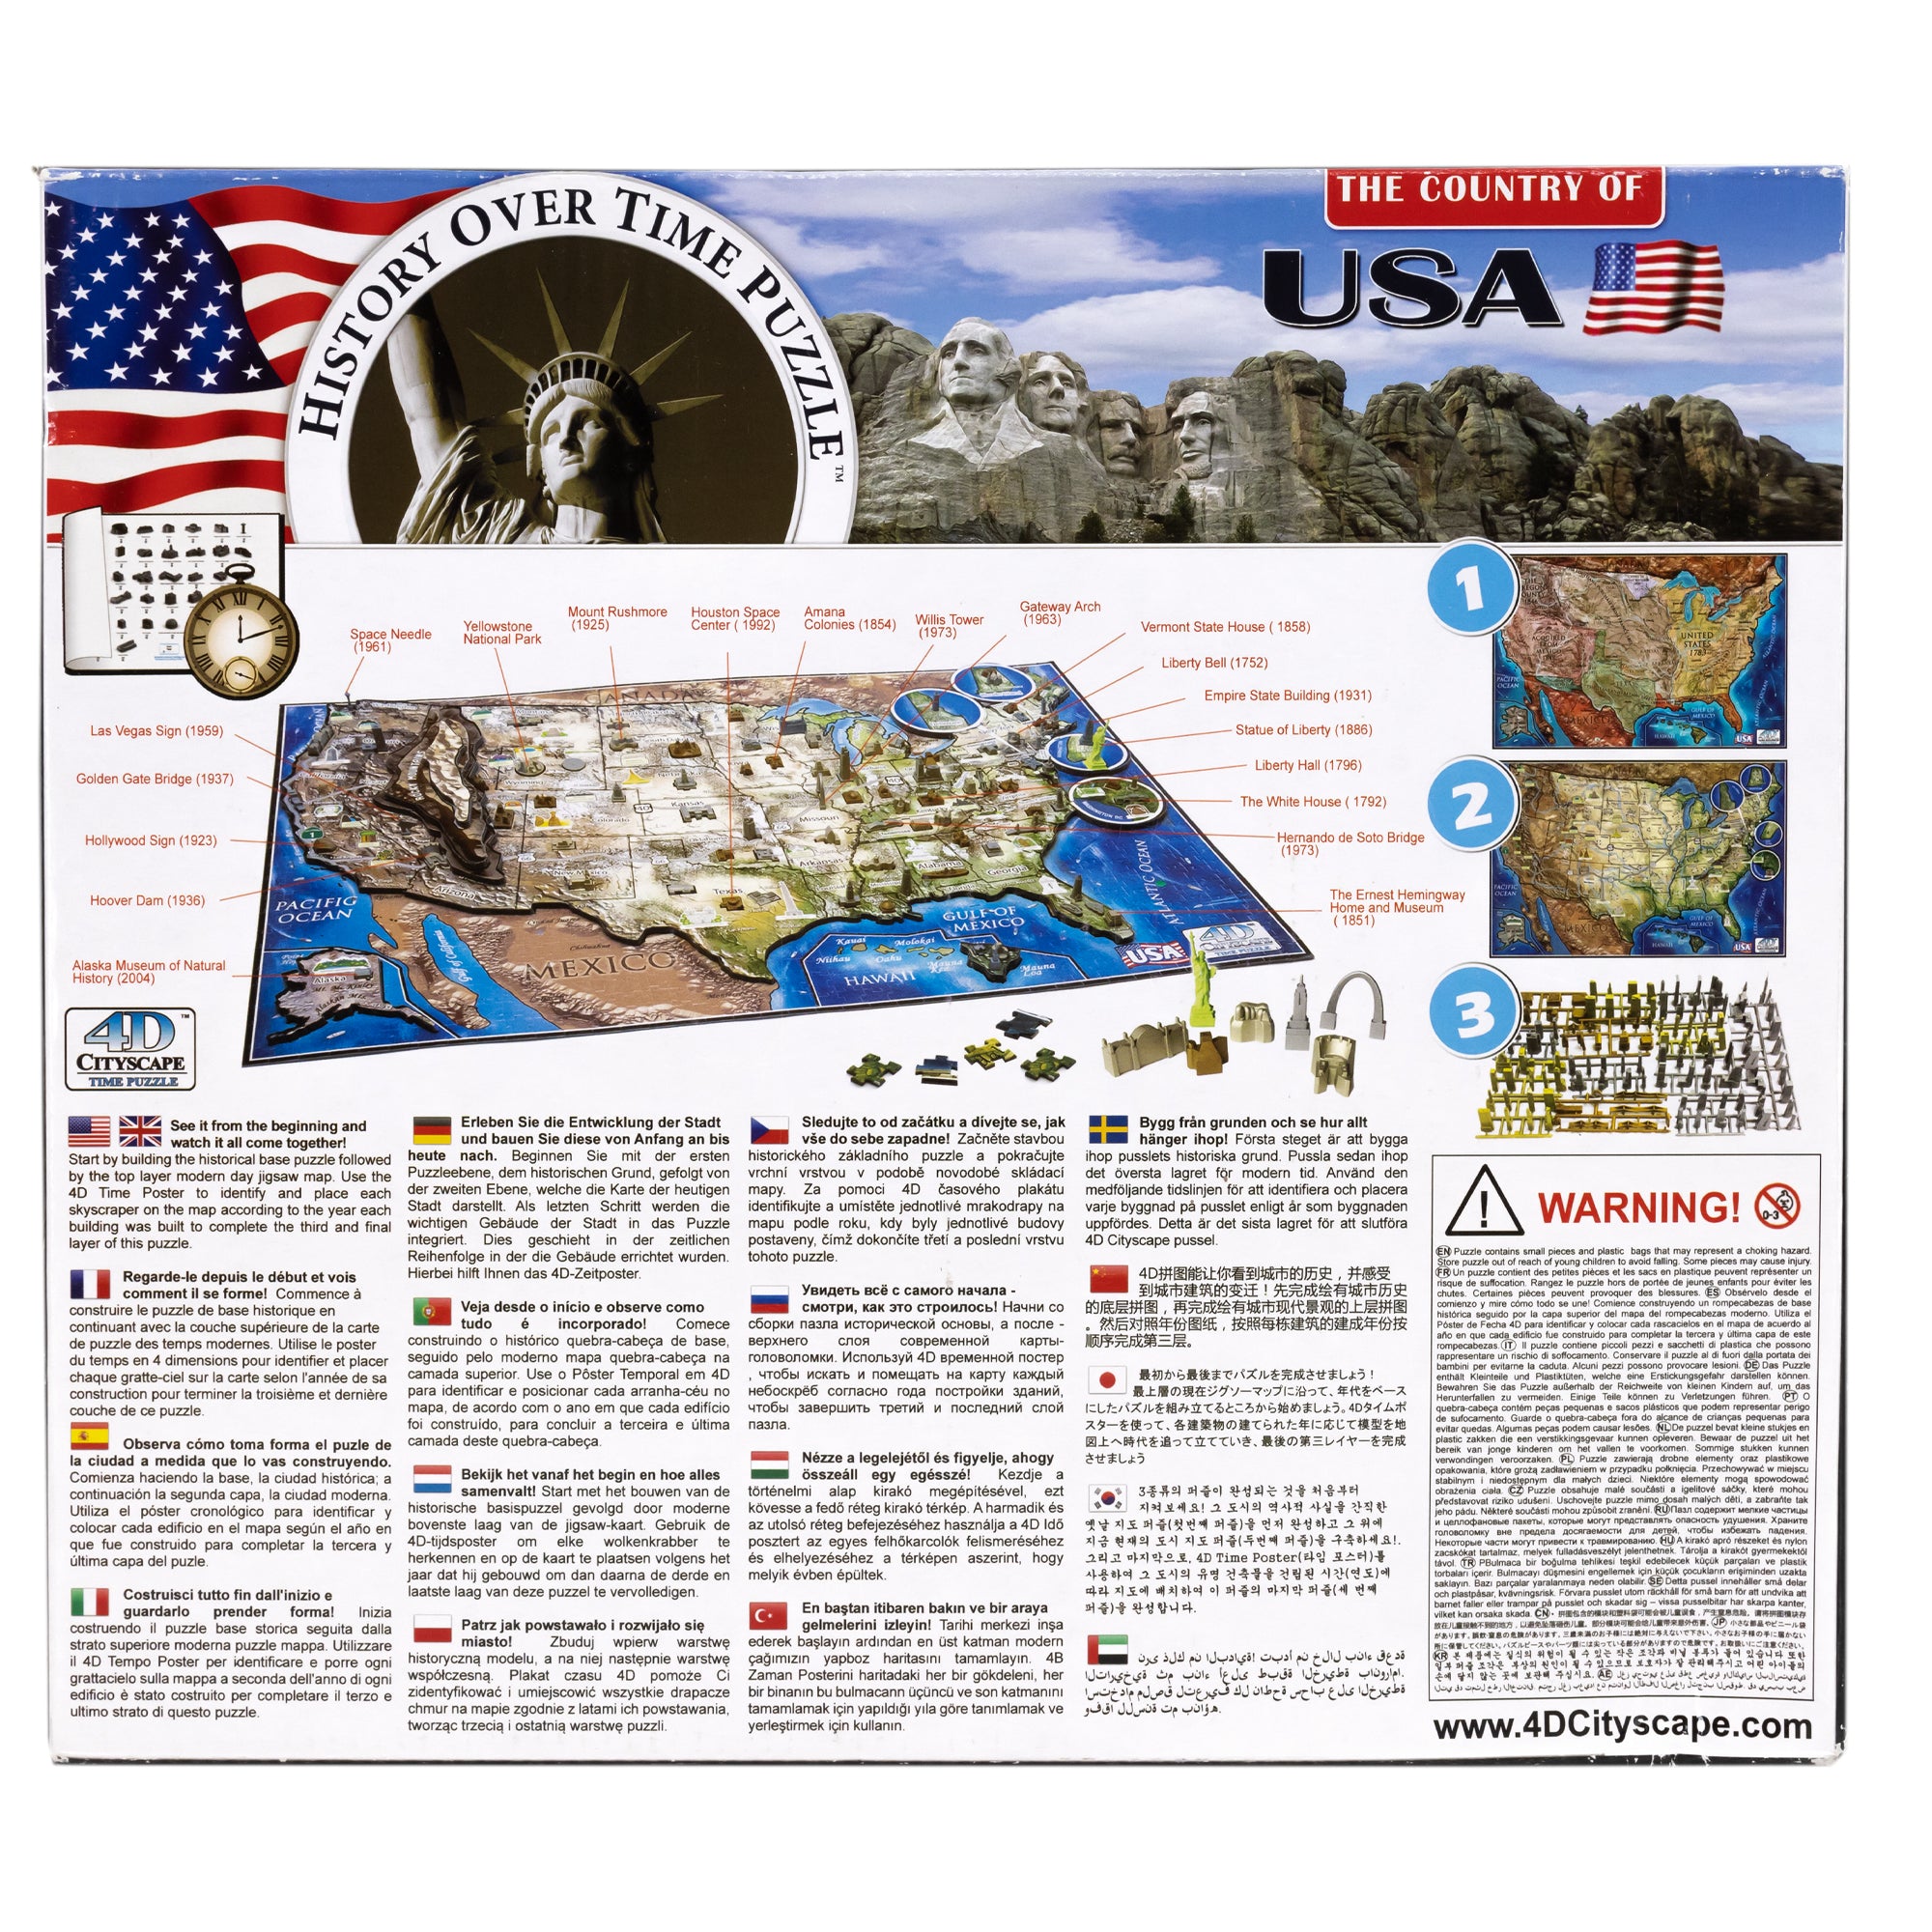 The back of the U S A, History Over Time Puzzle box. Across the top is an American flag, The Statue of Liberty surrounded by a round border with the title inside, and Mount Rushmore. Below is an image of the completed puzzle with several famous building pieces off to the side. To the right, it shows 3 steps; the puzzle base, the 2nd layer, and the iconic building pieces. At the very bottom is a warning written in many languages.